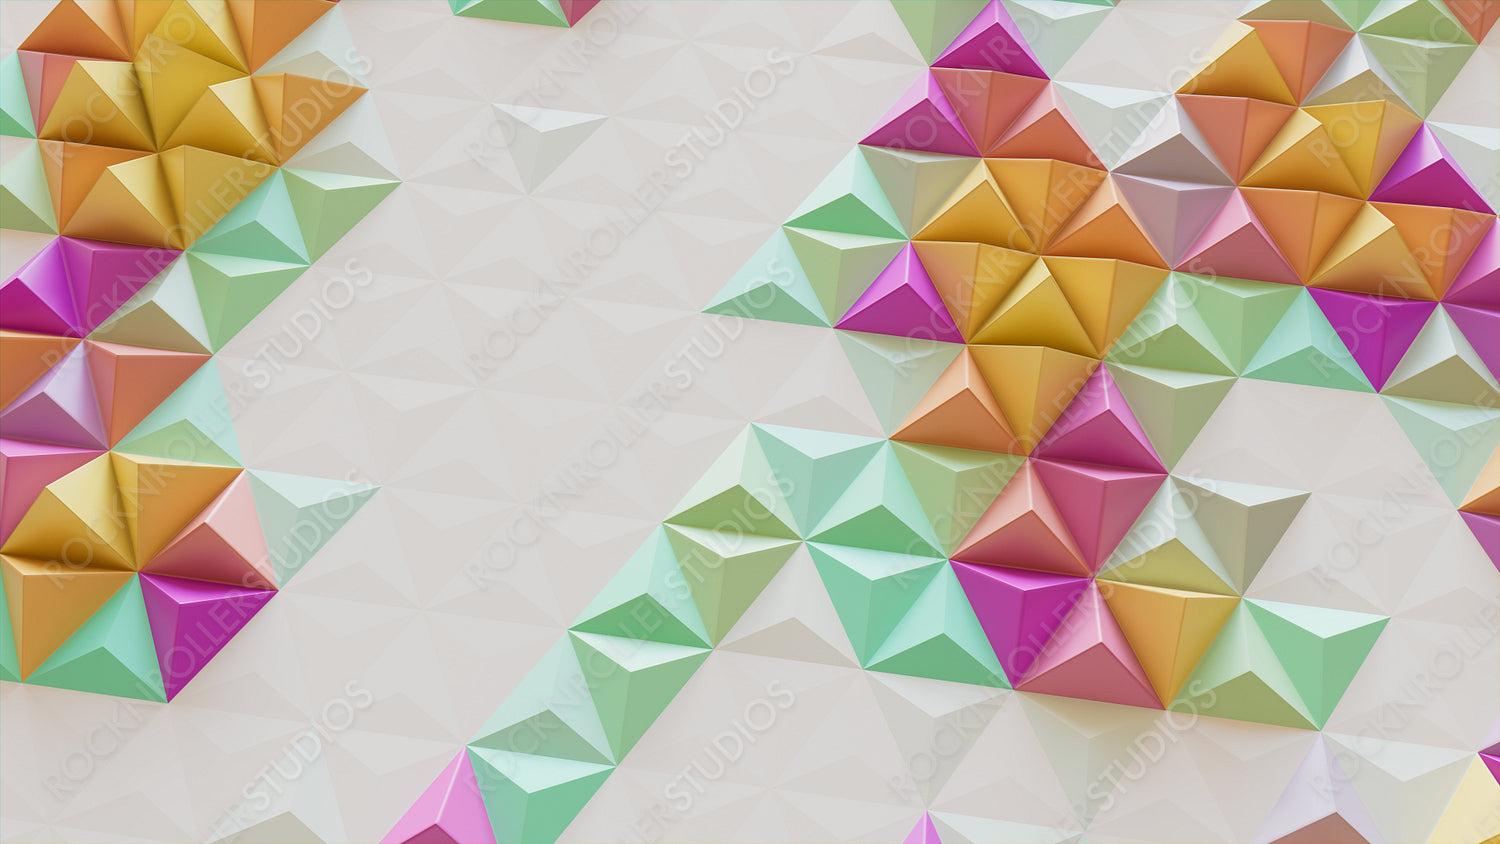 Multicolored Three-Dimensional Surface with Triangular Pyramids. Modern, Bright 3d Background.